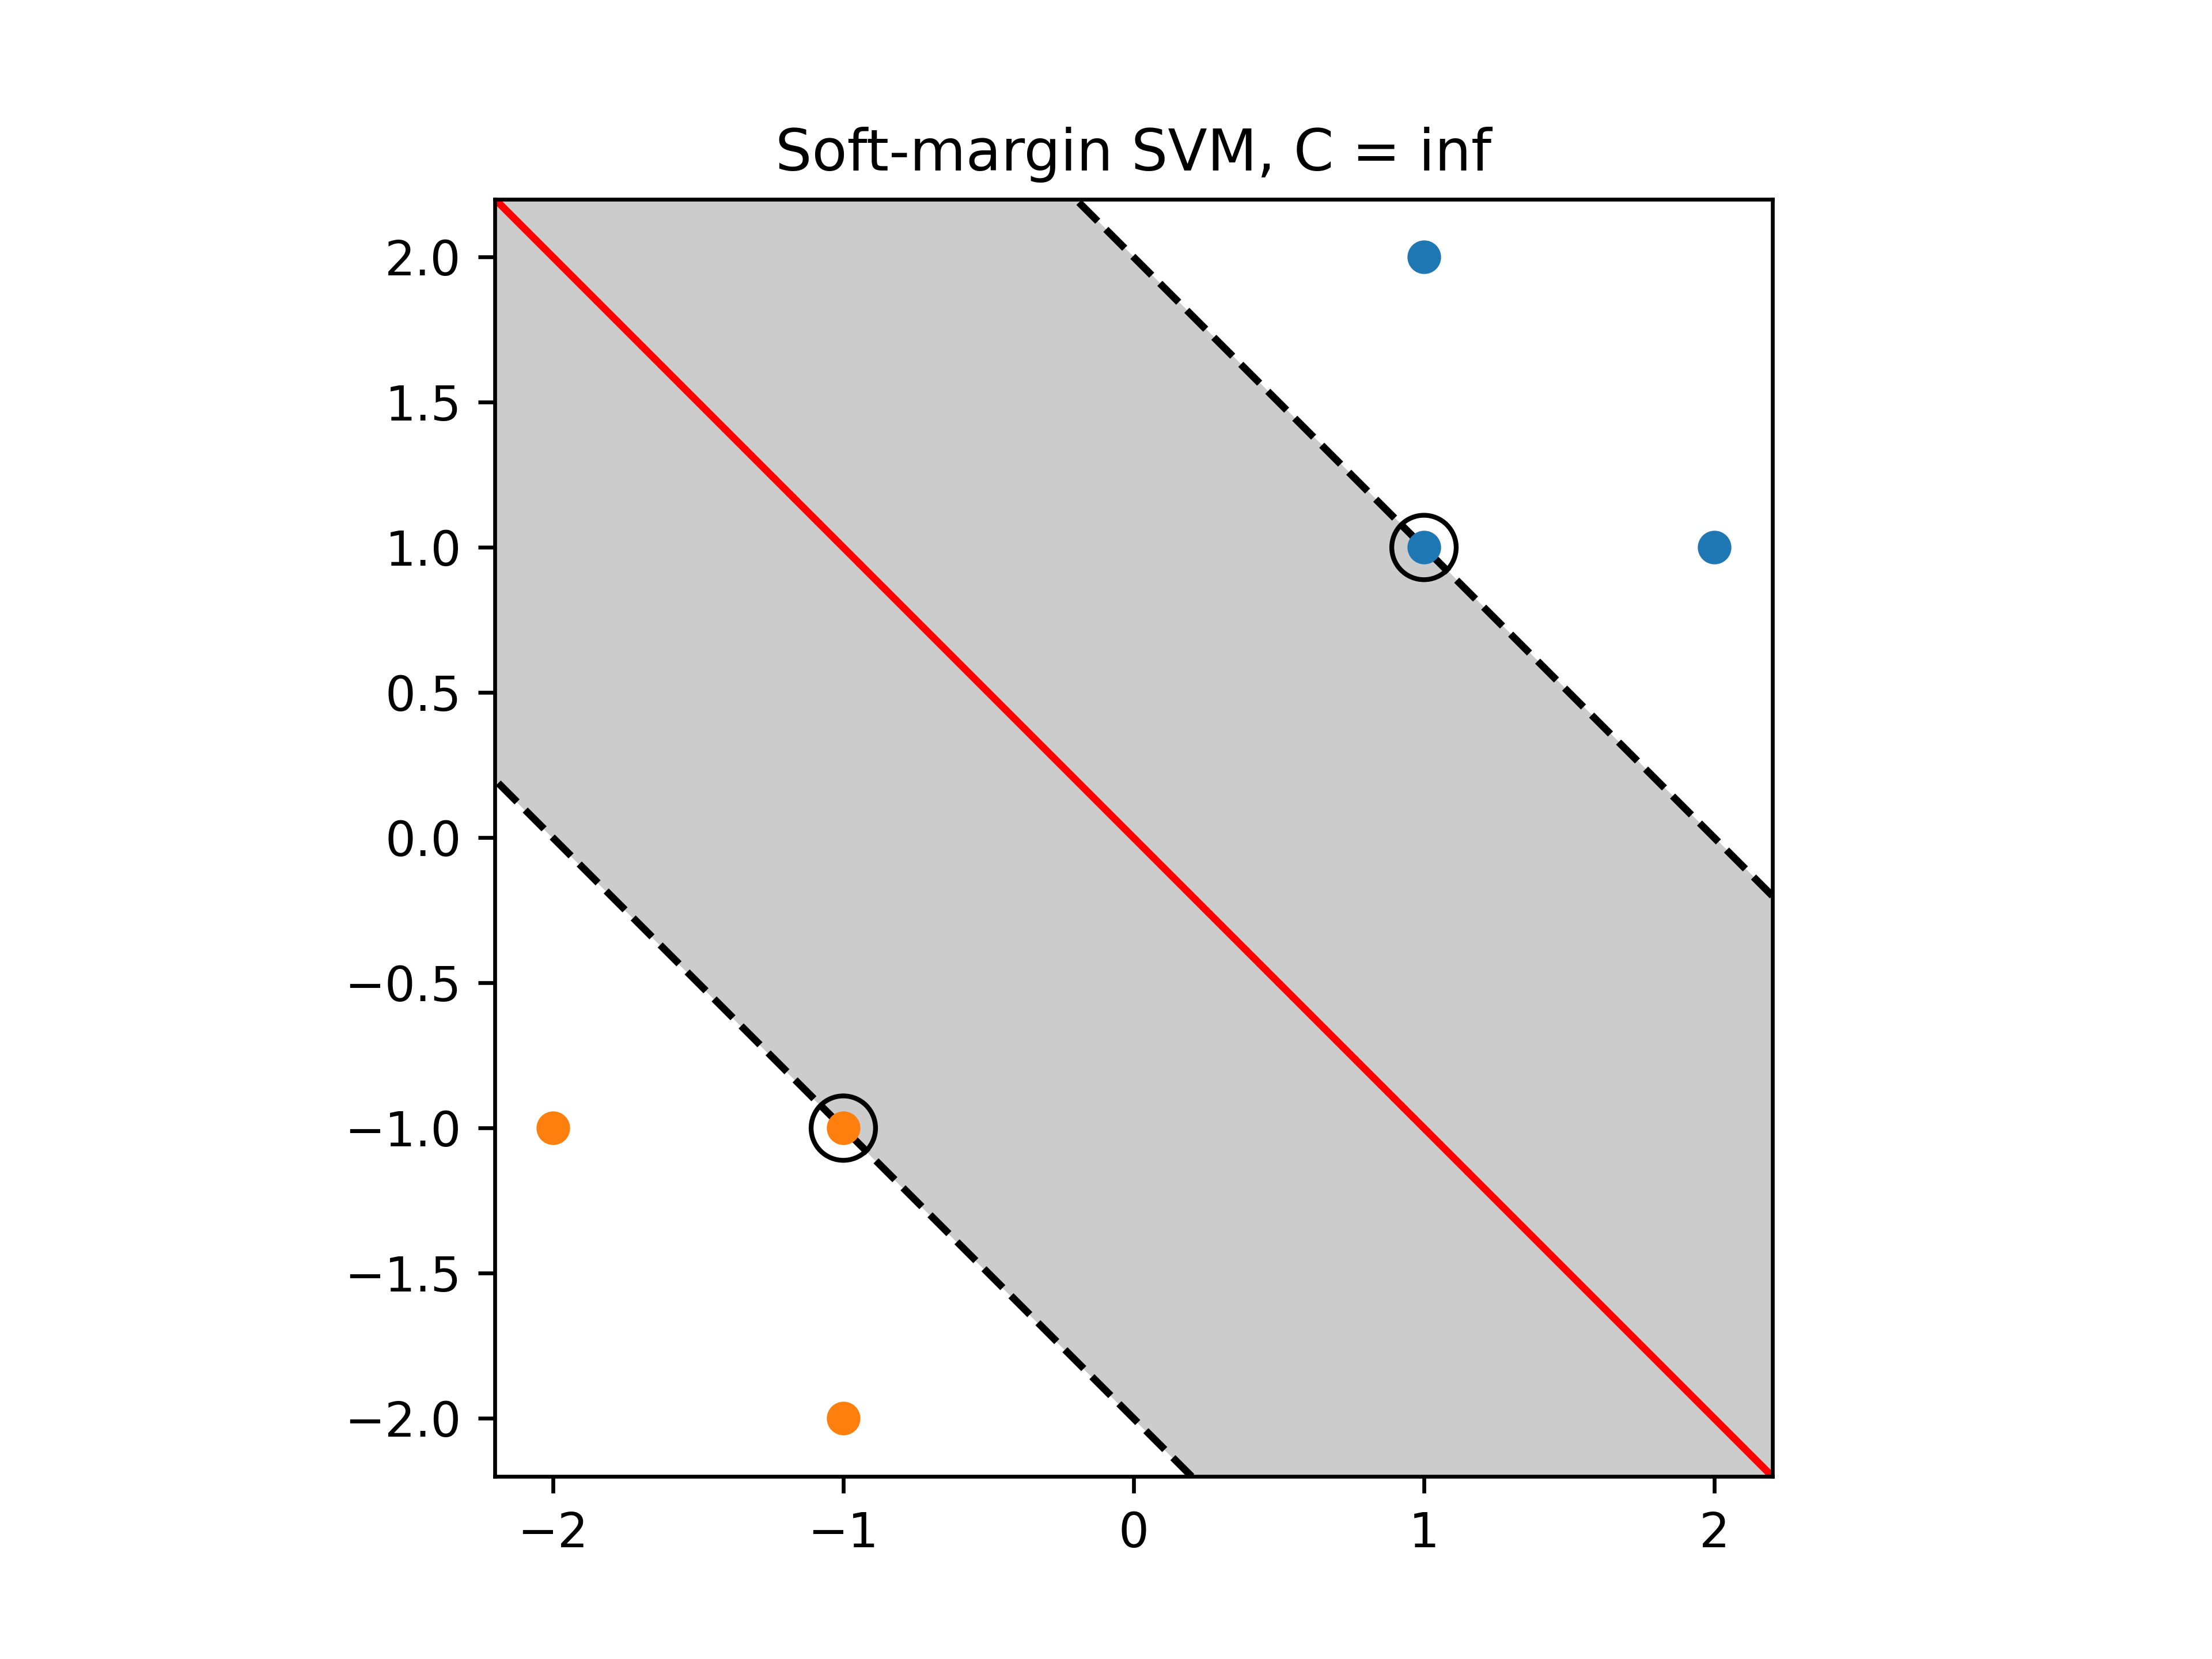 Linear SVM result from the code snippet